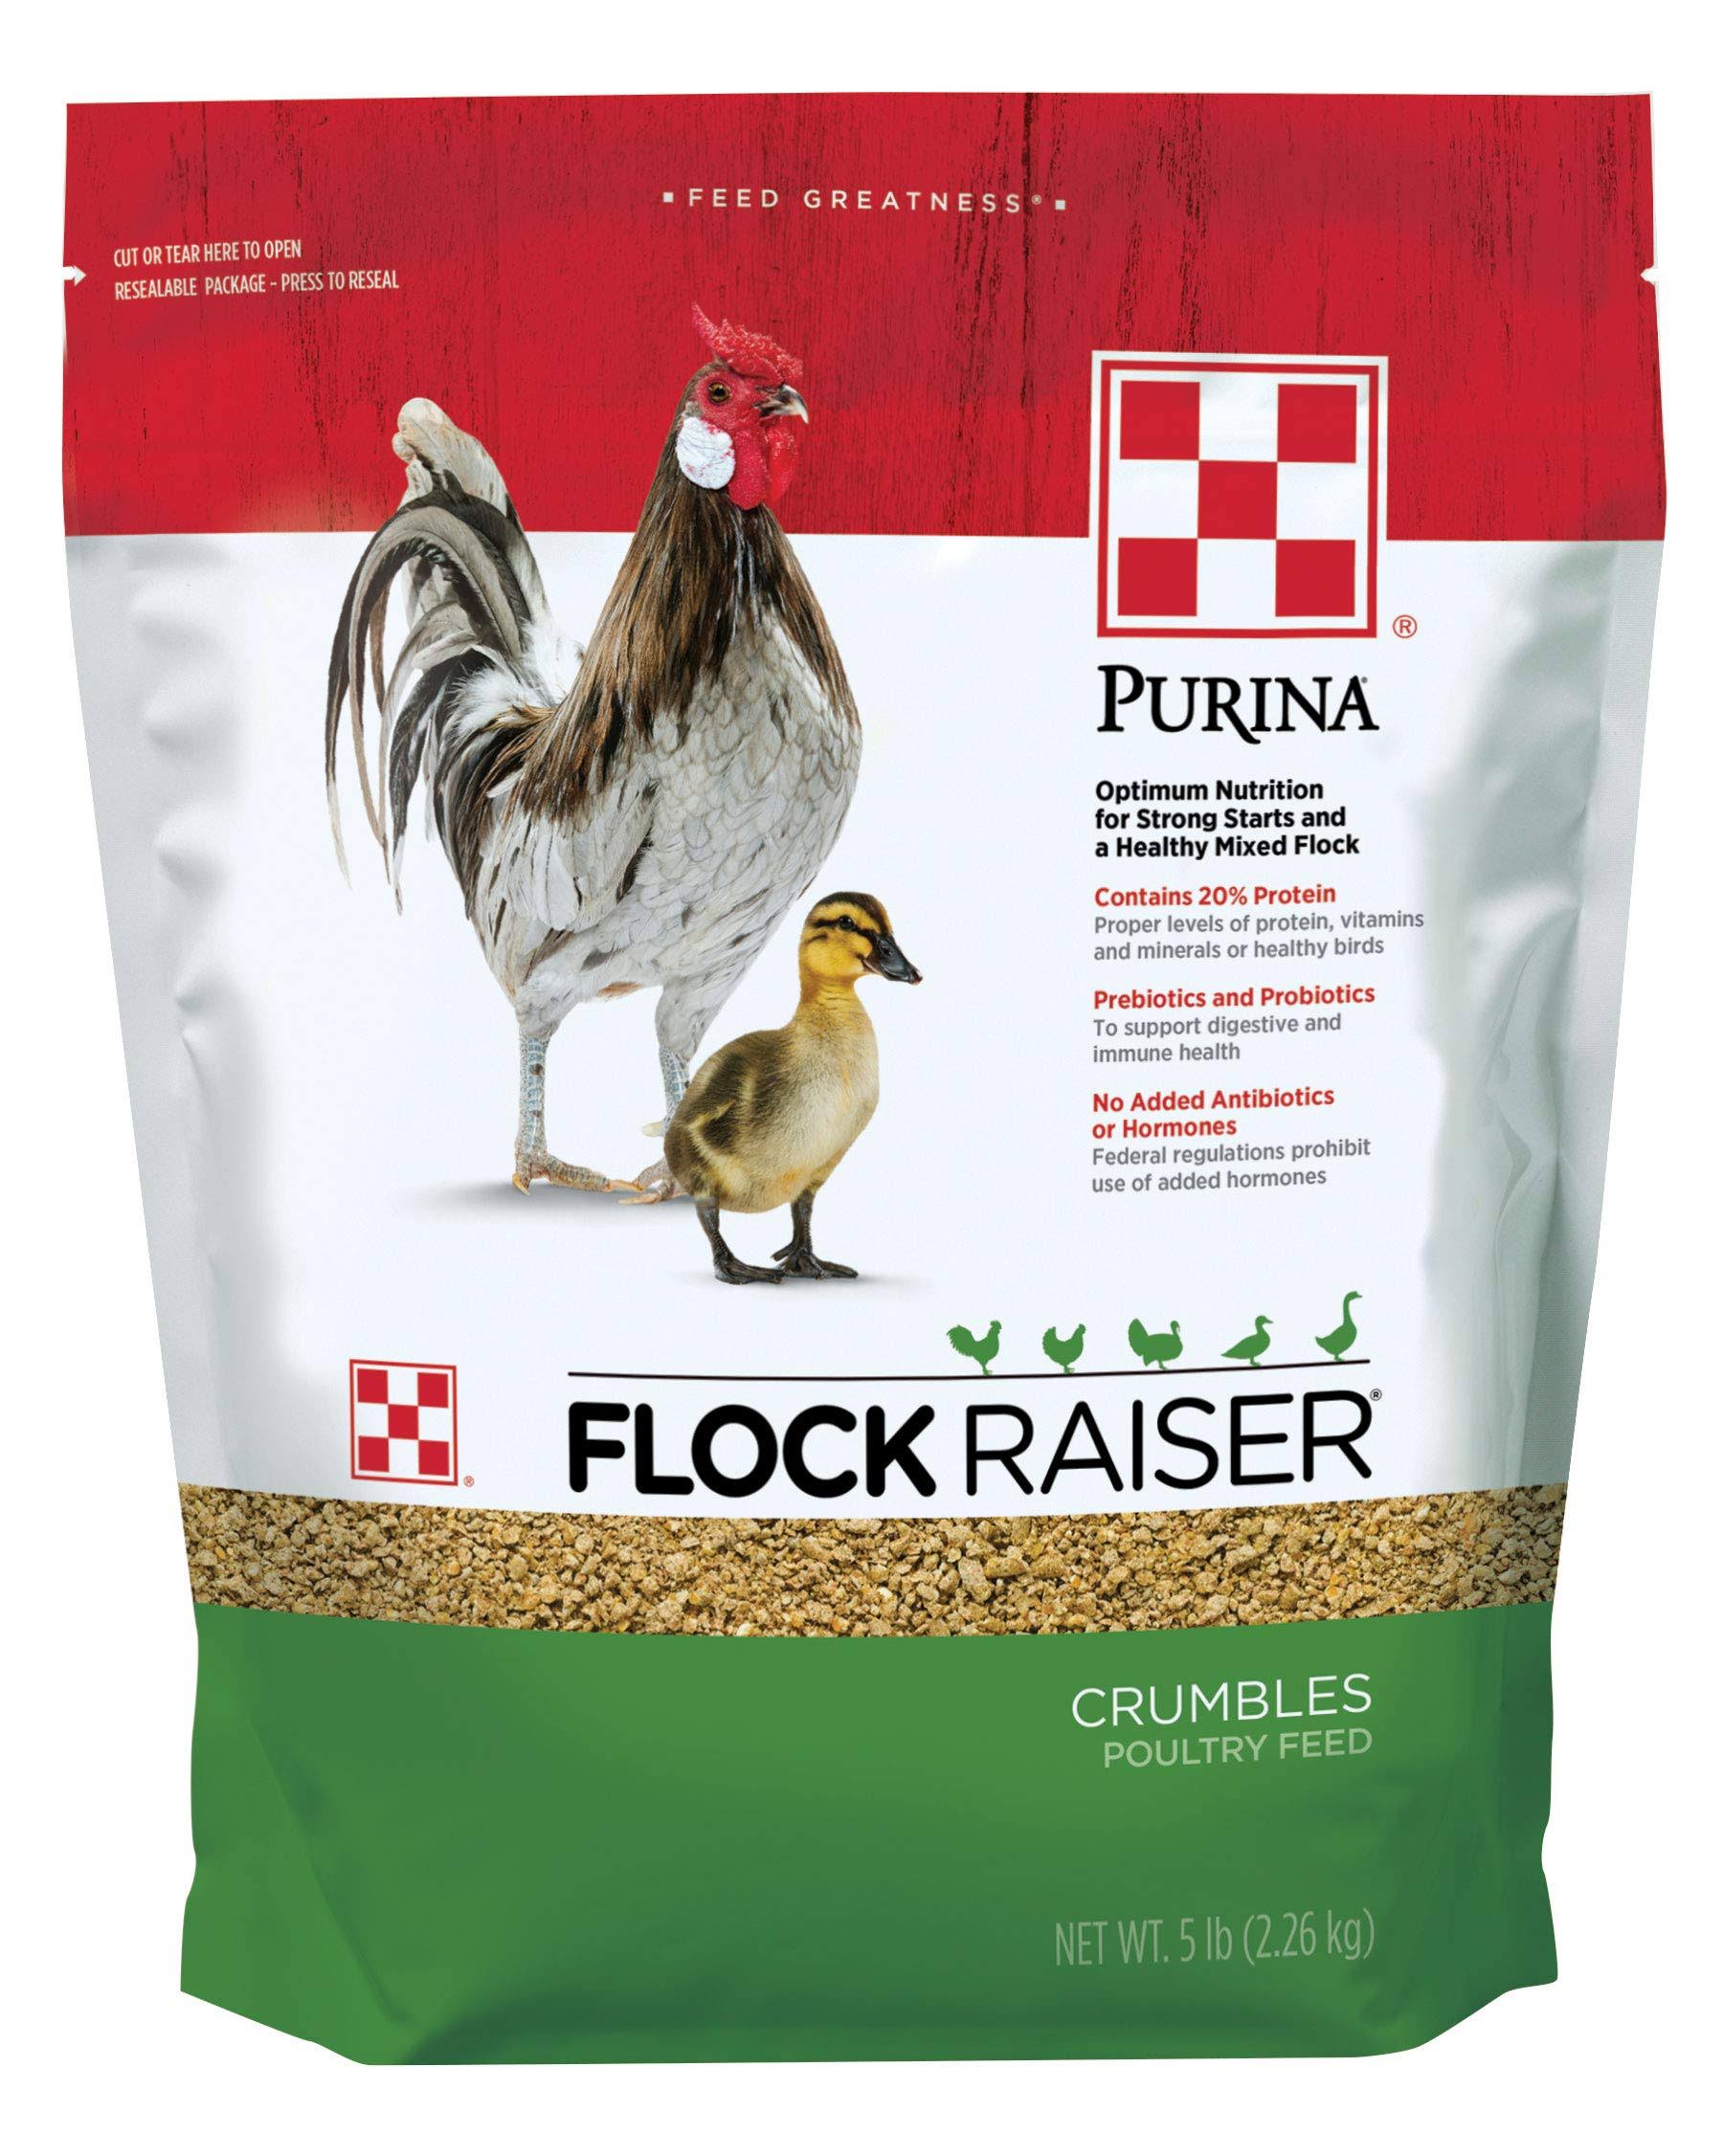 Purina Flock Raiser Crumbles Poultry Feed Nutritionally Complete - 5 Pound Bag